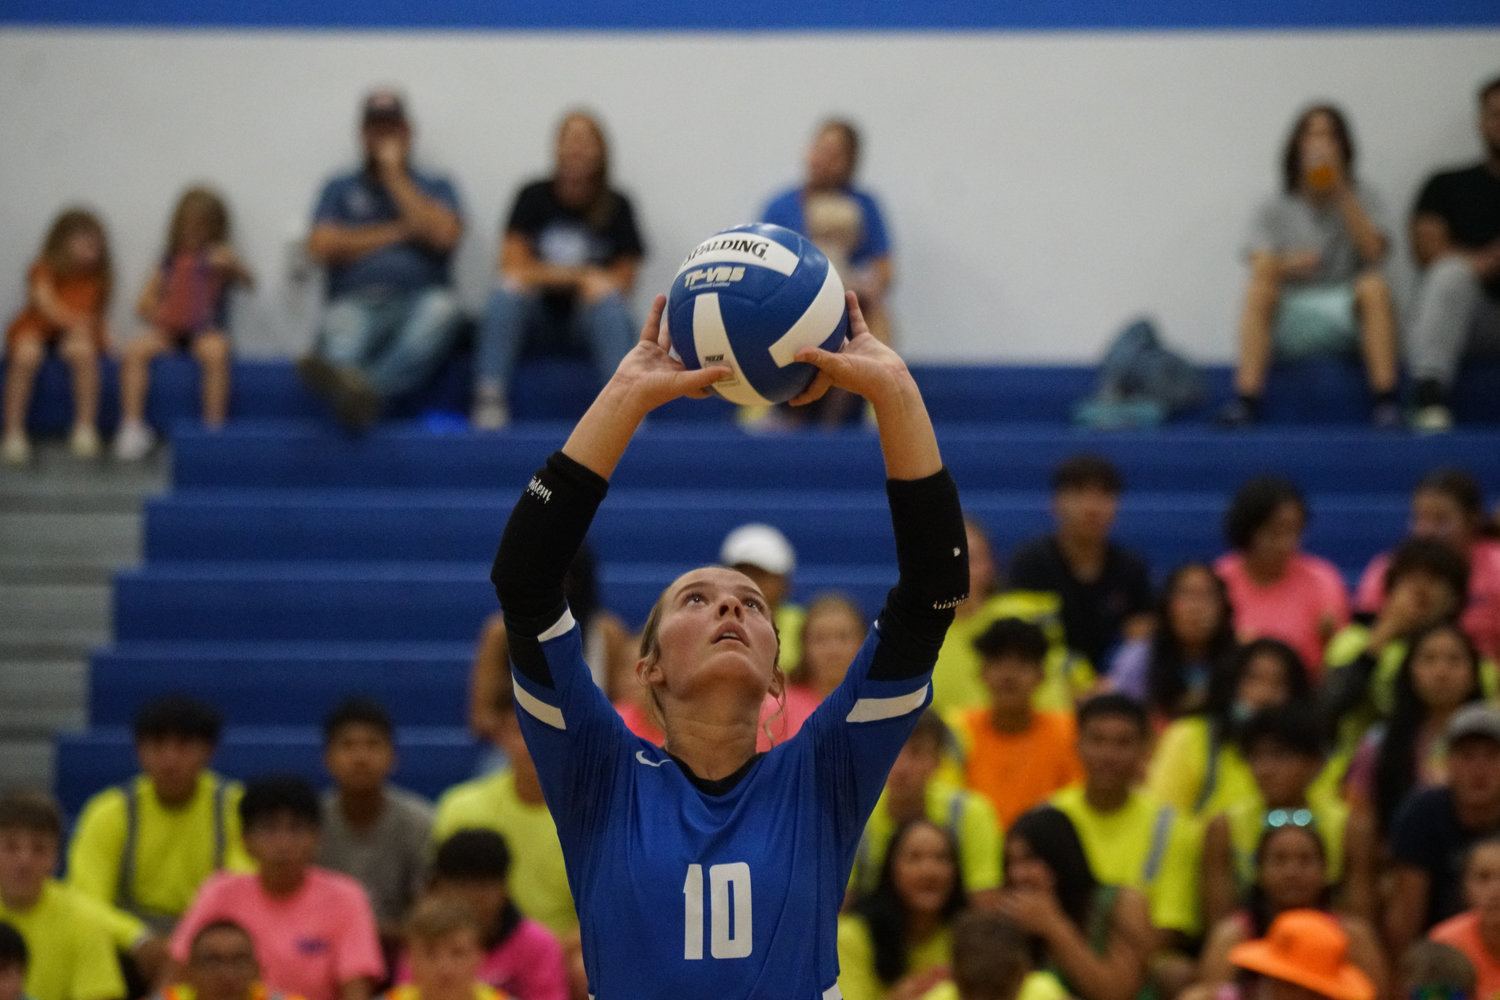 Maelyn Wainwright spikes the ball at the game against Mid-Prairie Thursday, Sept. 8.